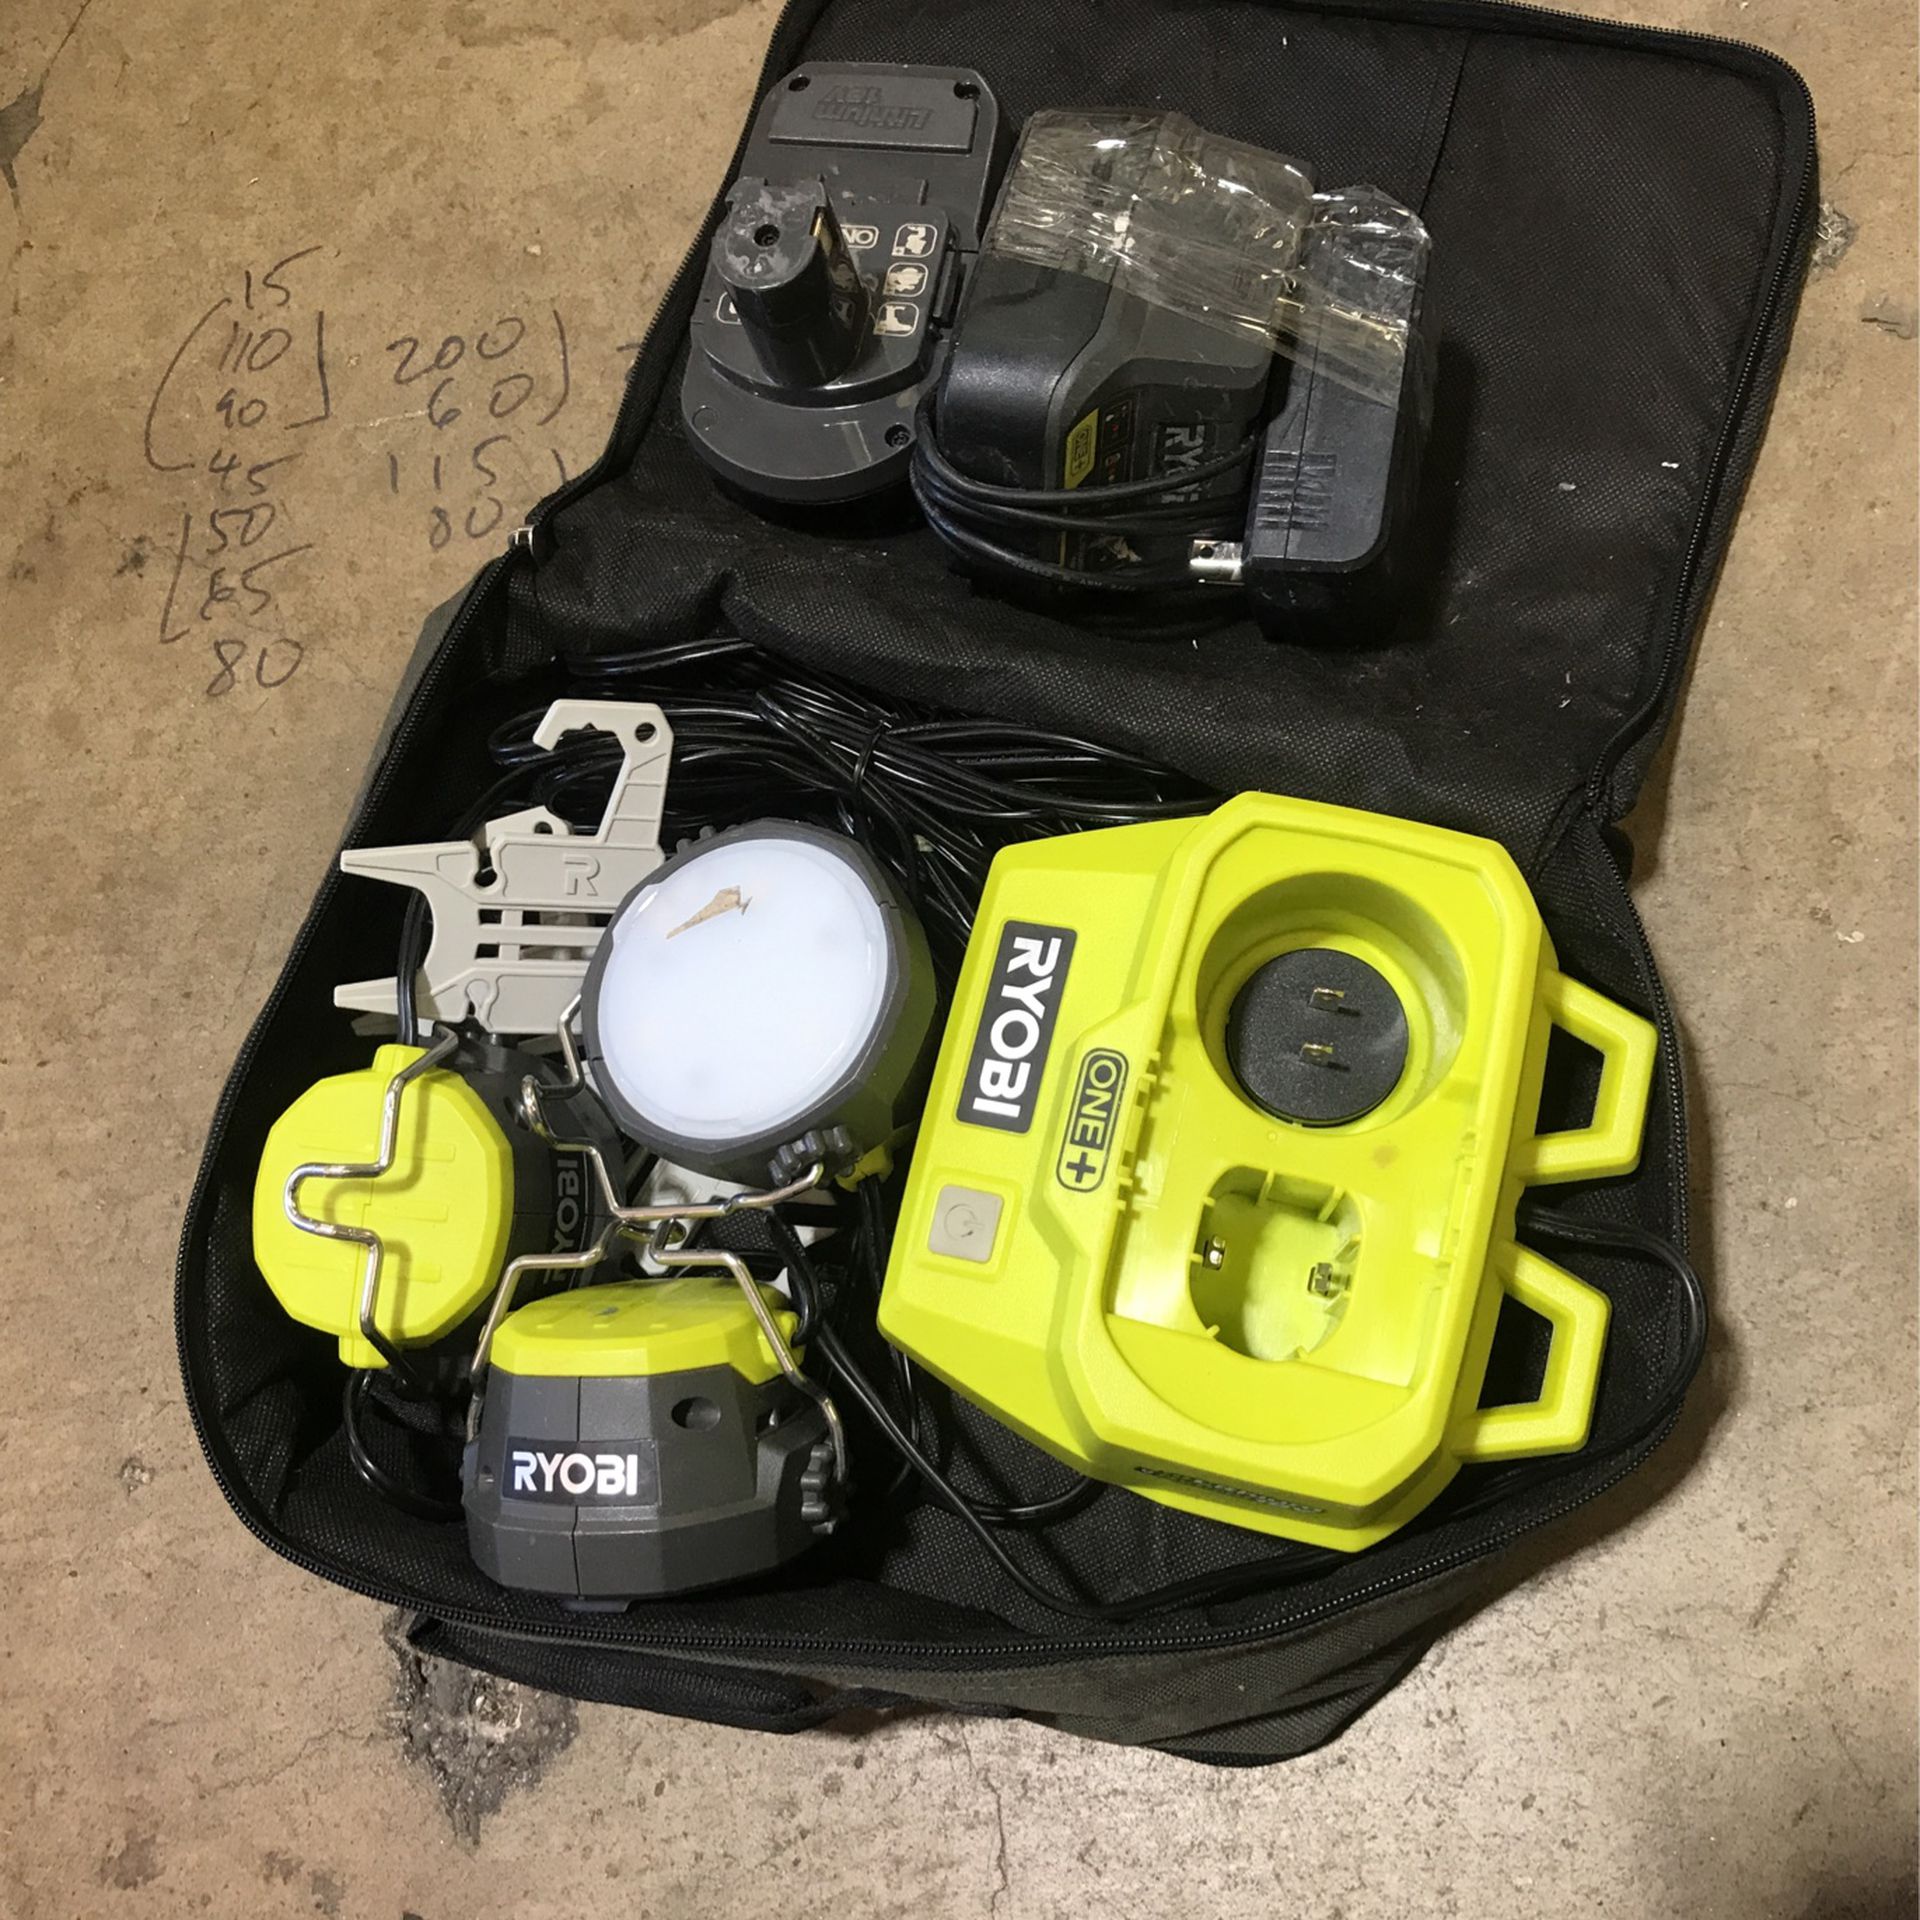 Ryobi Light With Battery And Charger